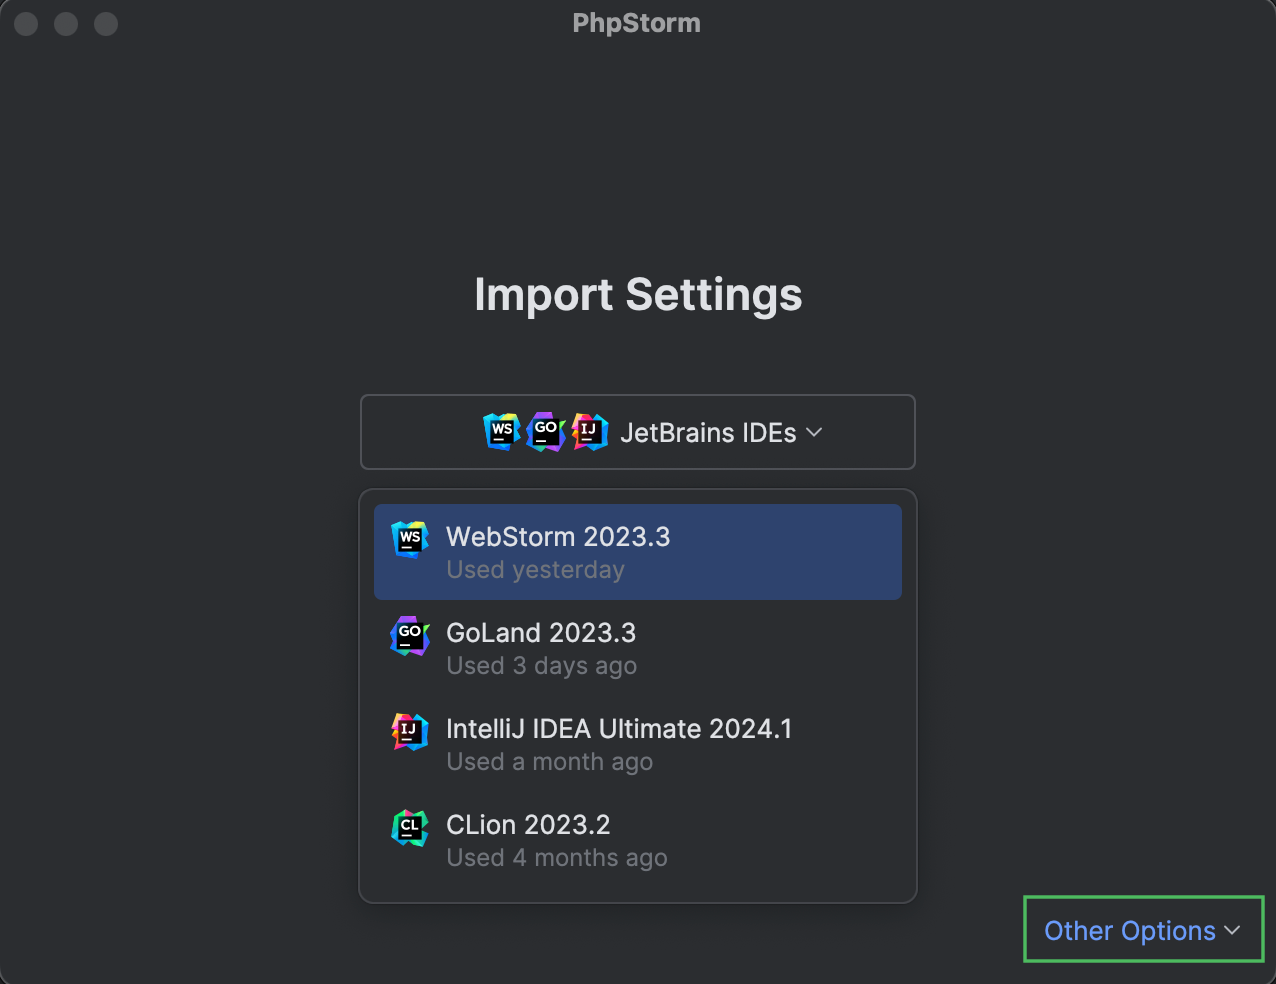 The Import Settings dialog with the opened drop-down list